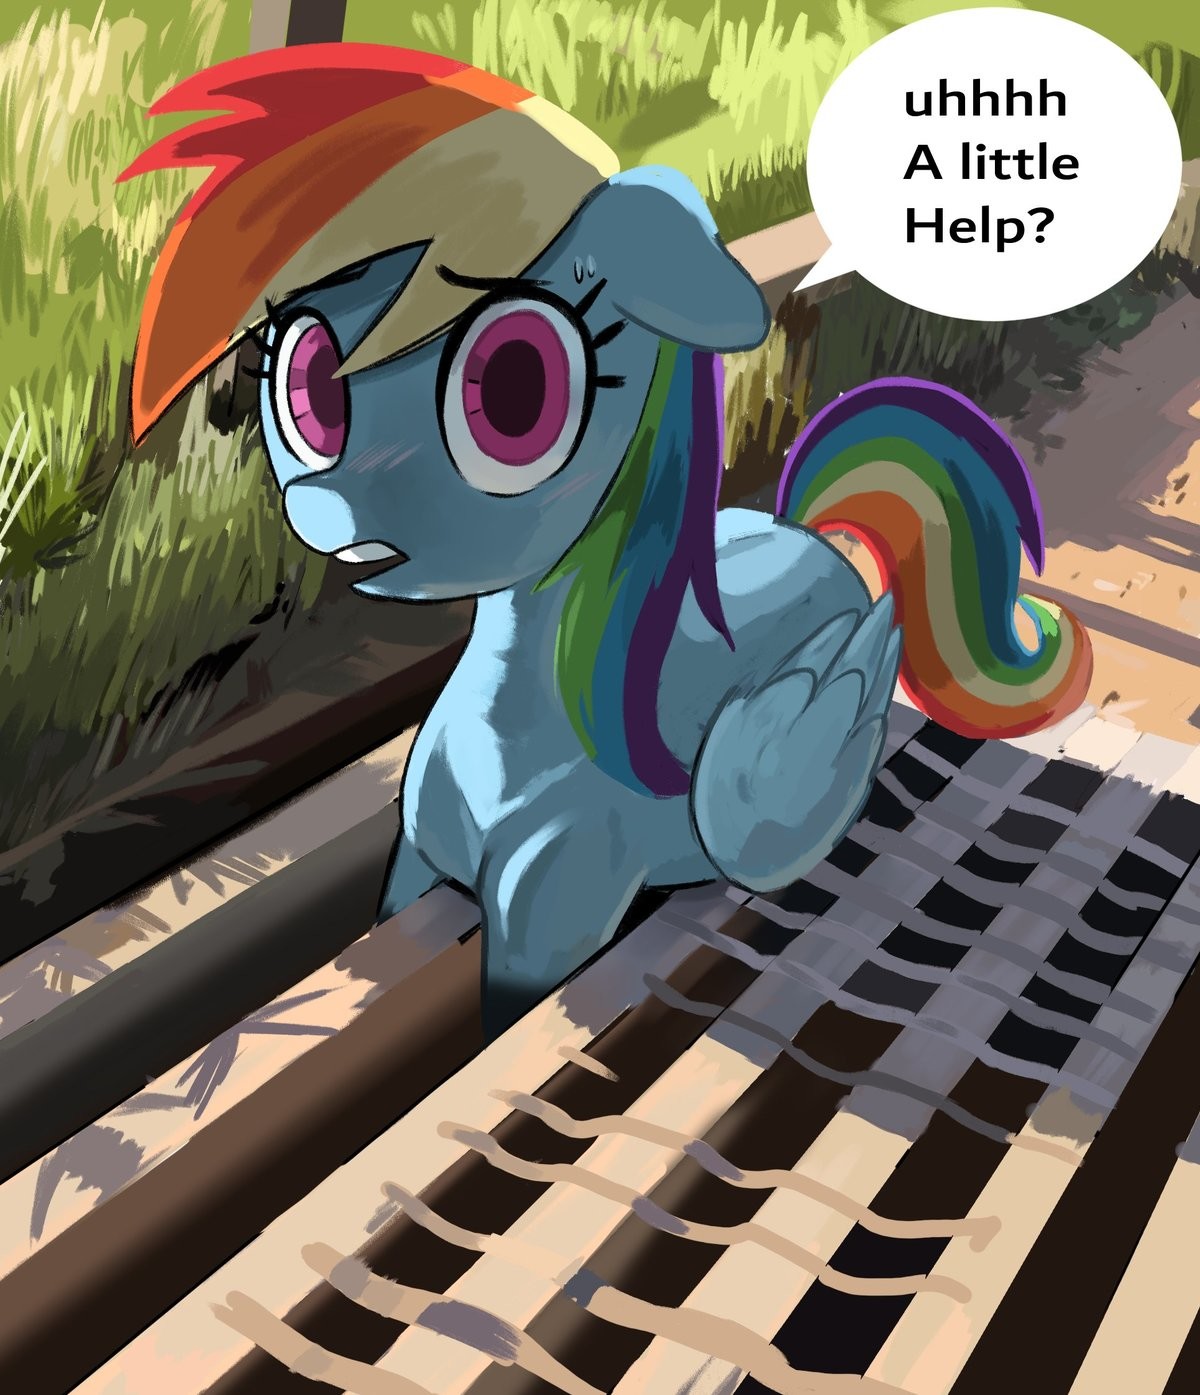 Pone is Stuck. .. what are you doing step-brony?